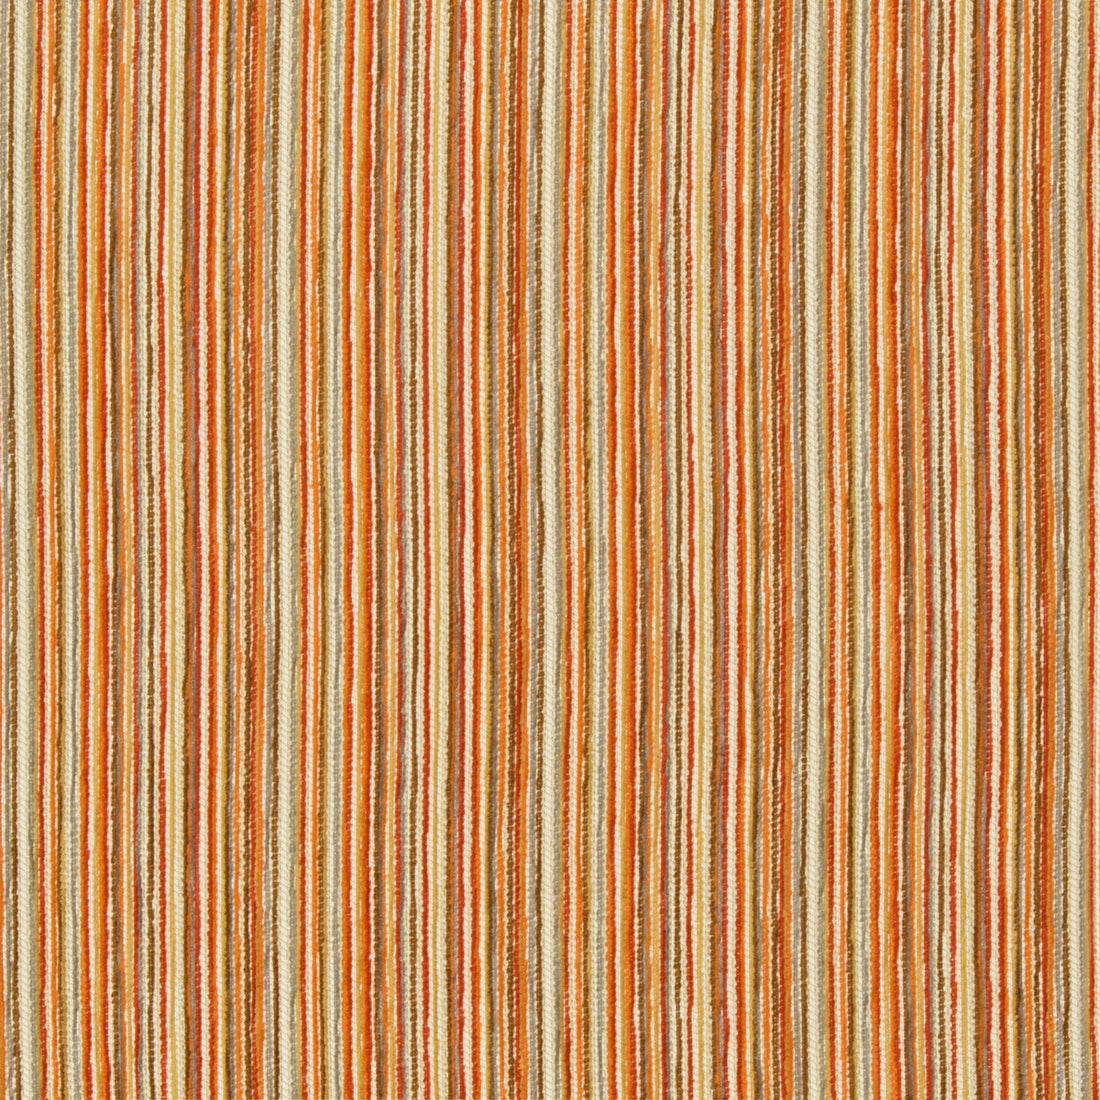 Kravet Design fabric in 34693-1211 color - pattern 34693.1211.0 - by Kravet Design in the Crypton Home collection